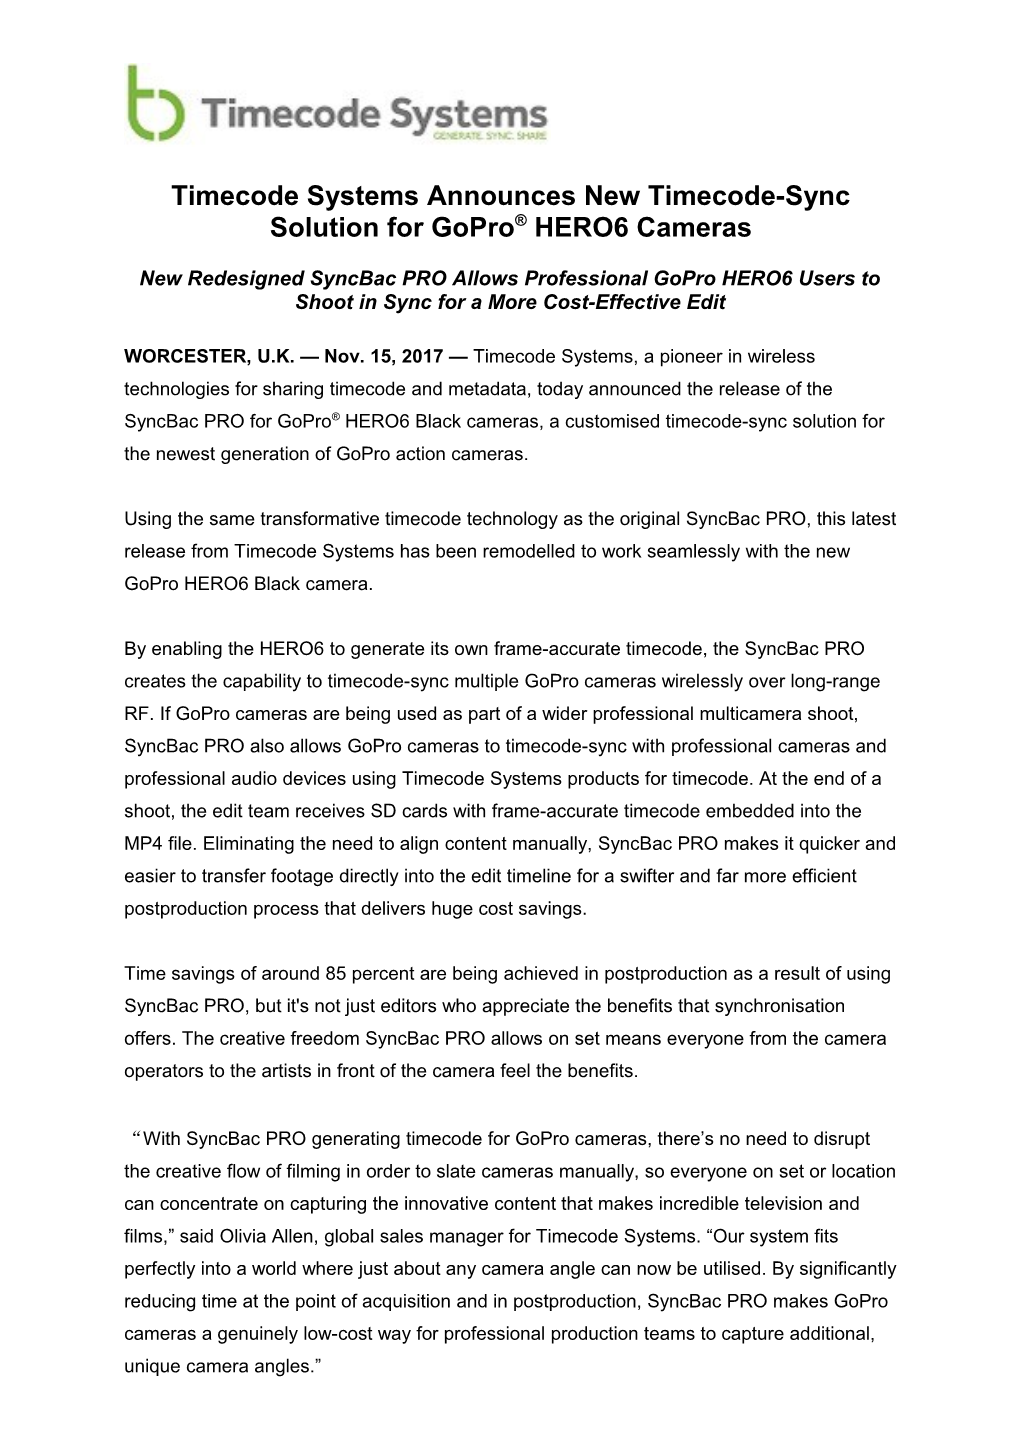 Timecode Systems Press Release